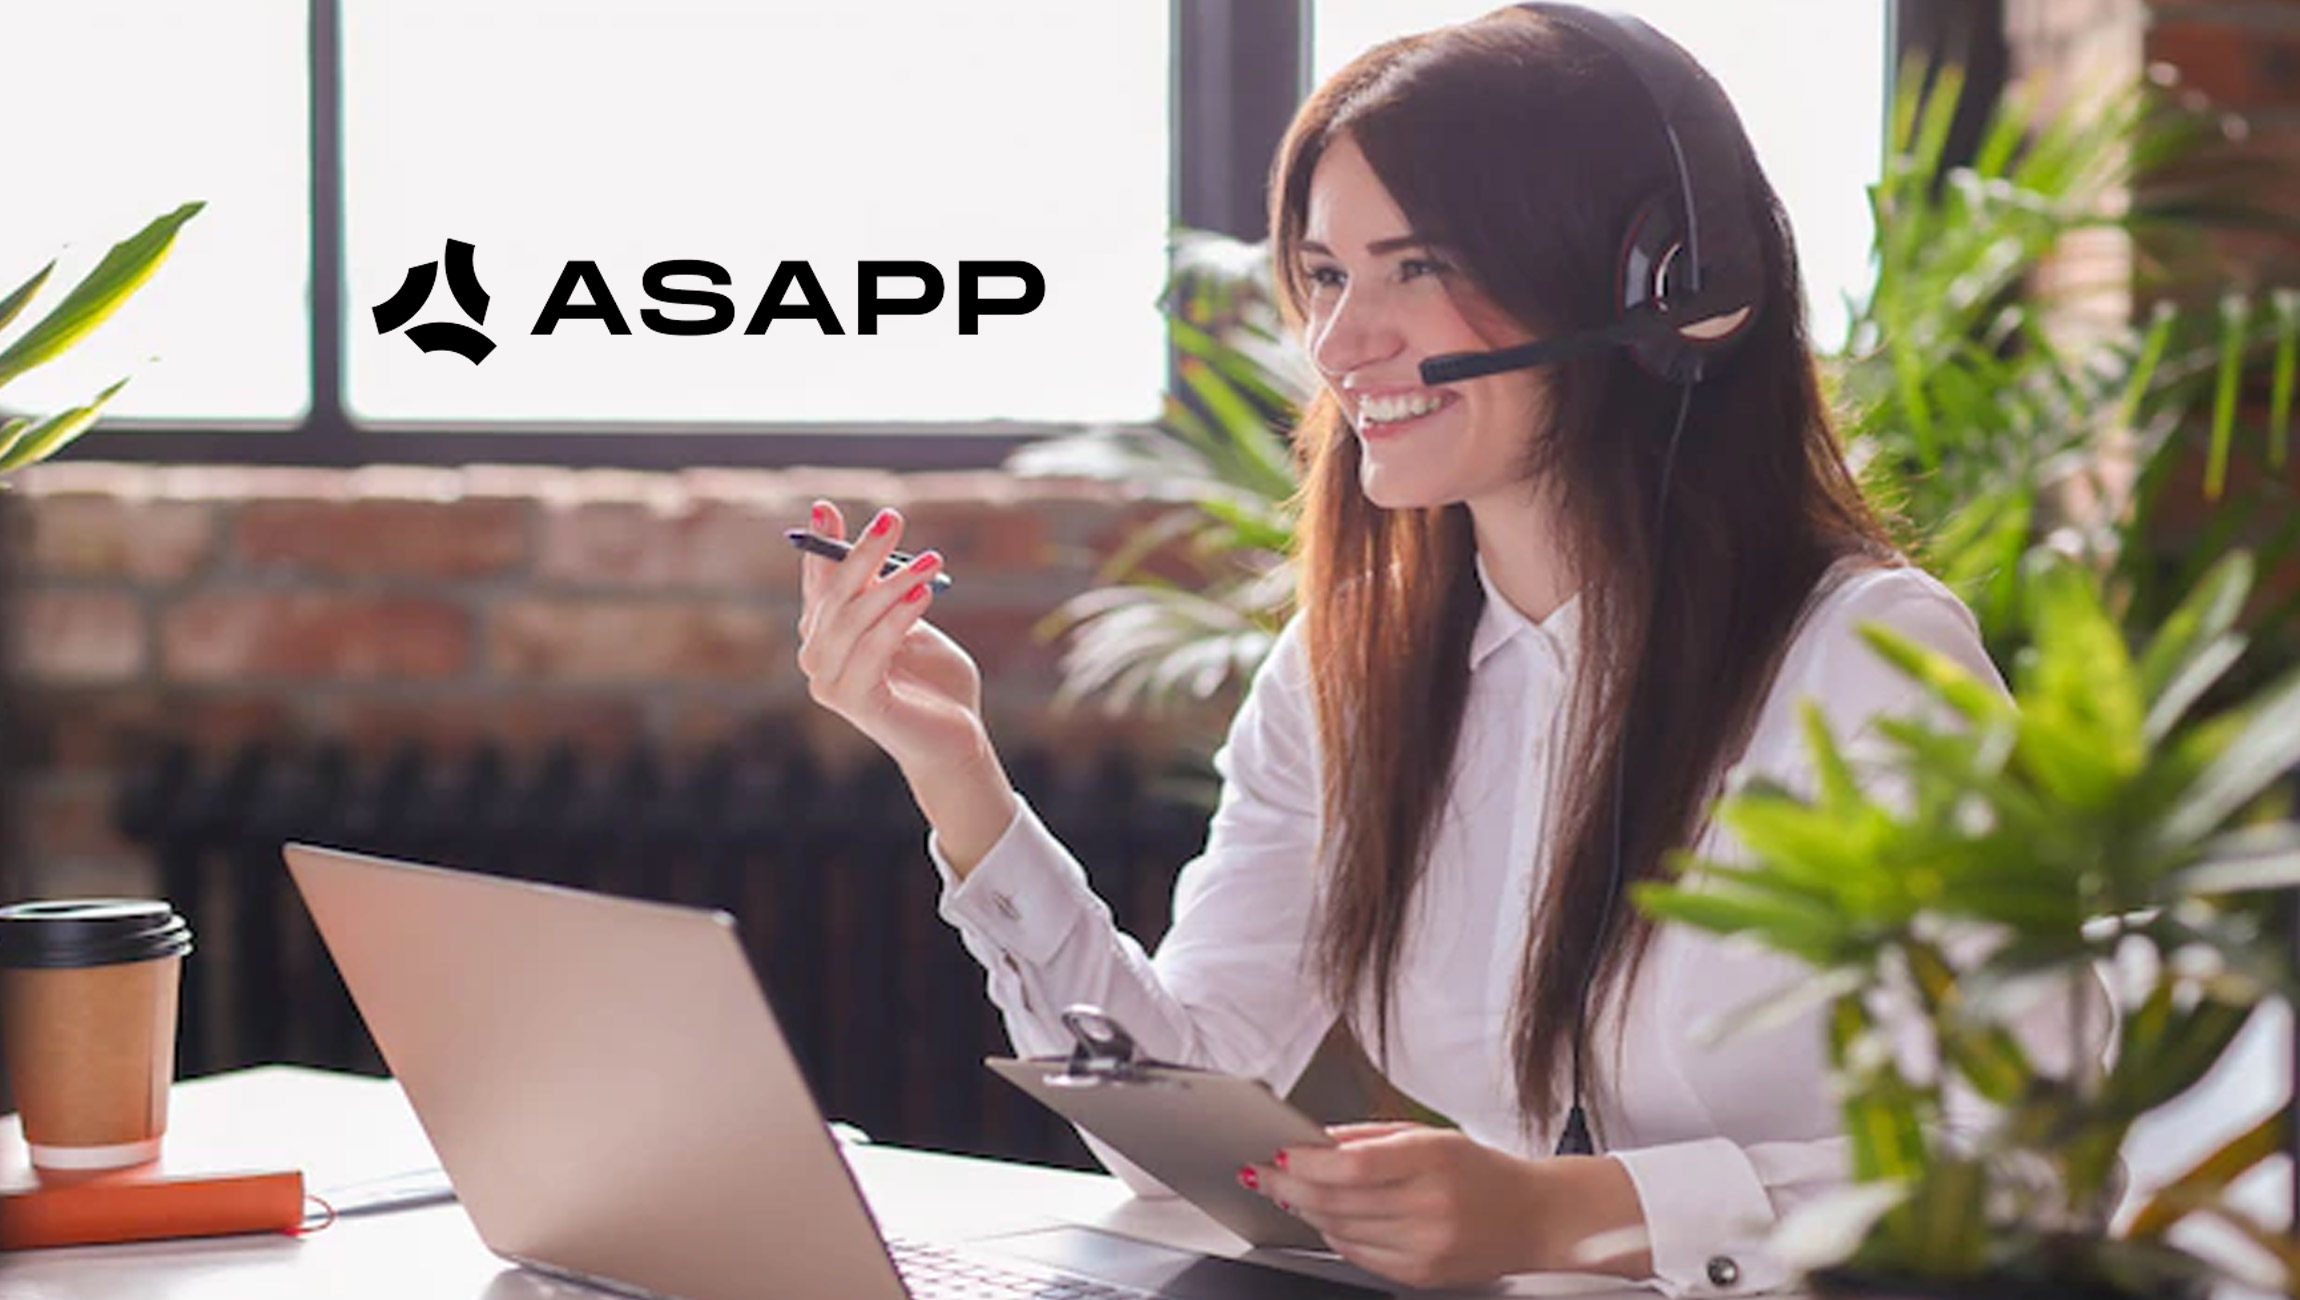 ASAPP CX Report Reveals 85% of Customer Service Agents Don’t Want to Return to Contact Centers, Work from Home Could Be Permanent